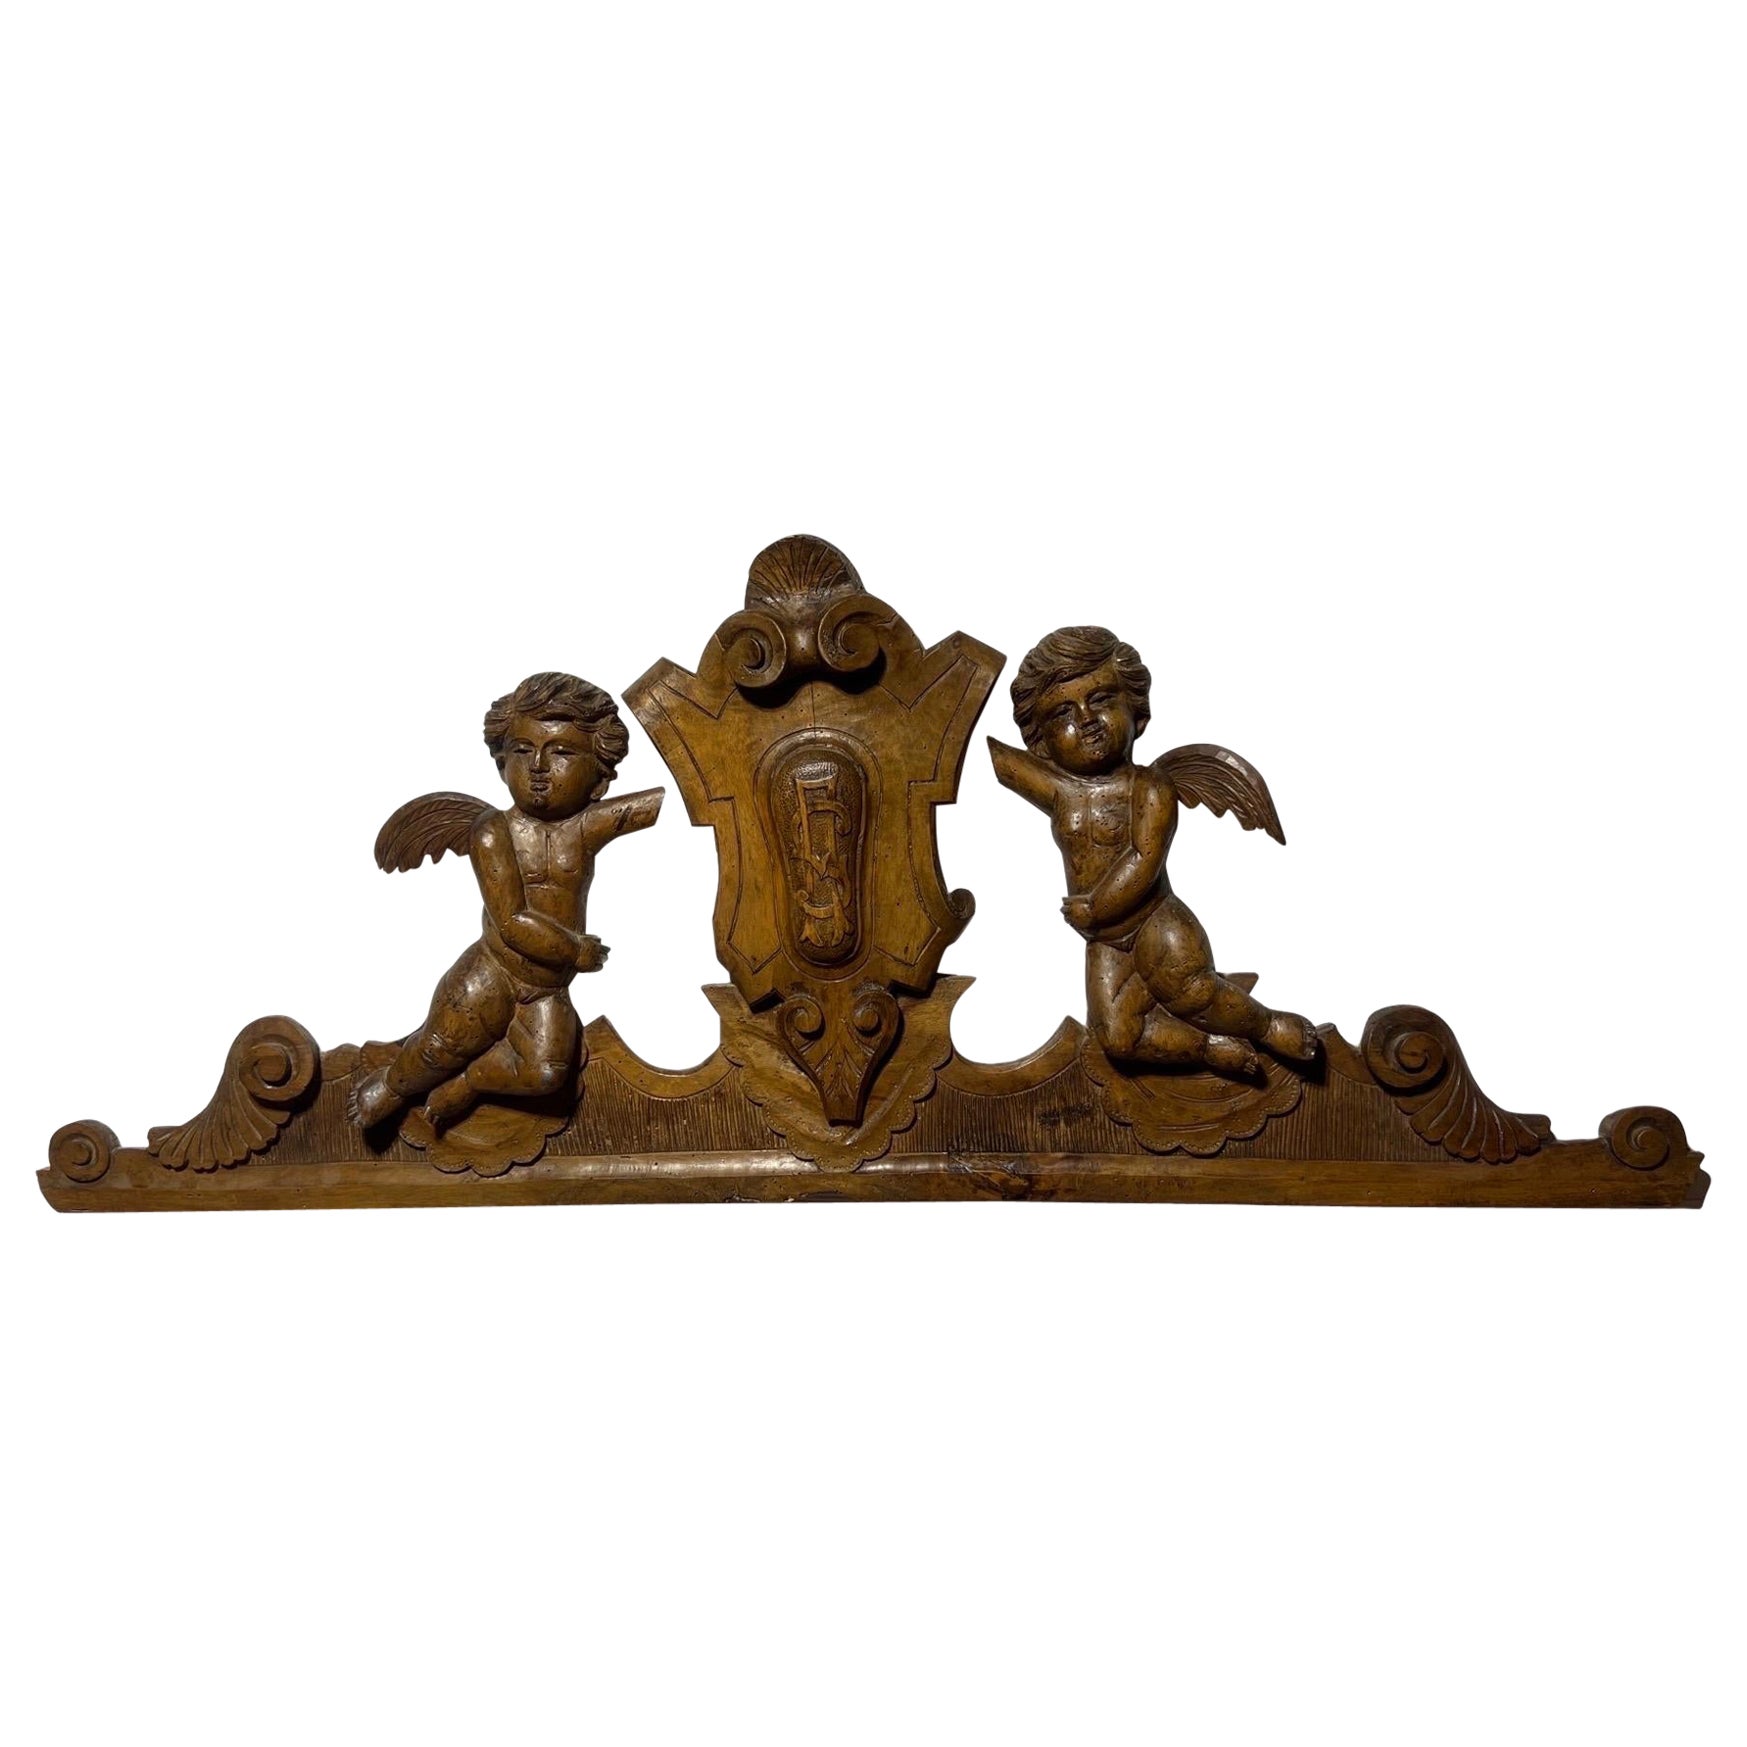 19th Century Carved Walnut Crown Piece or Crest With Monogram and Putti